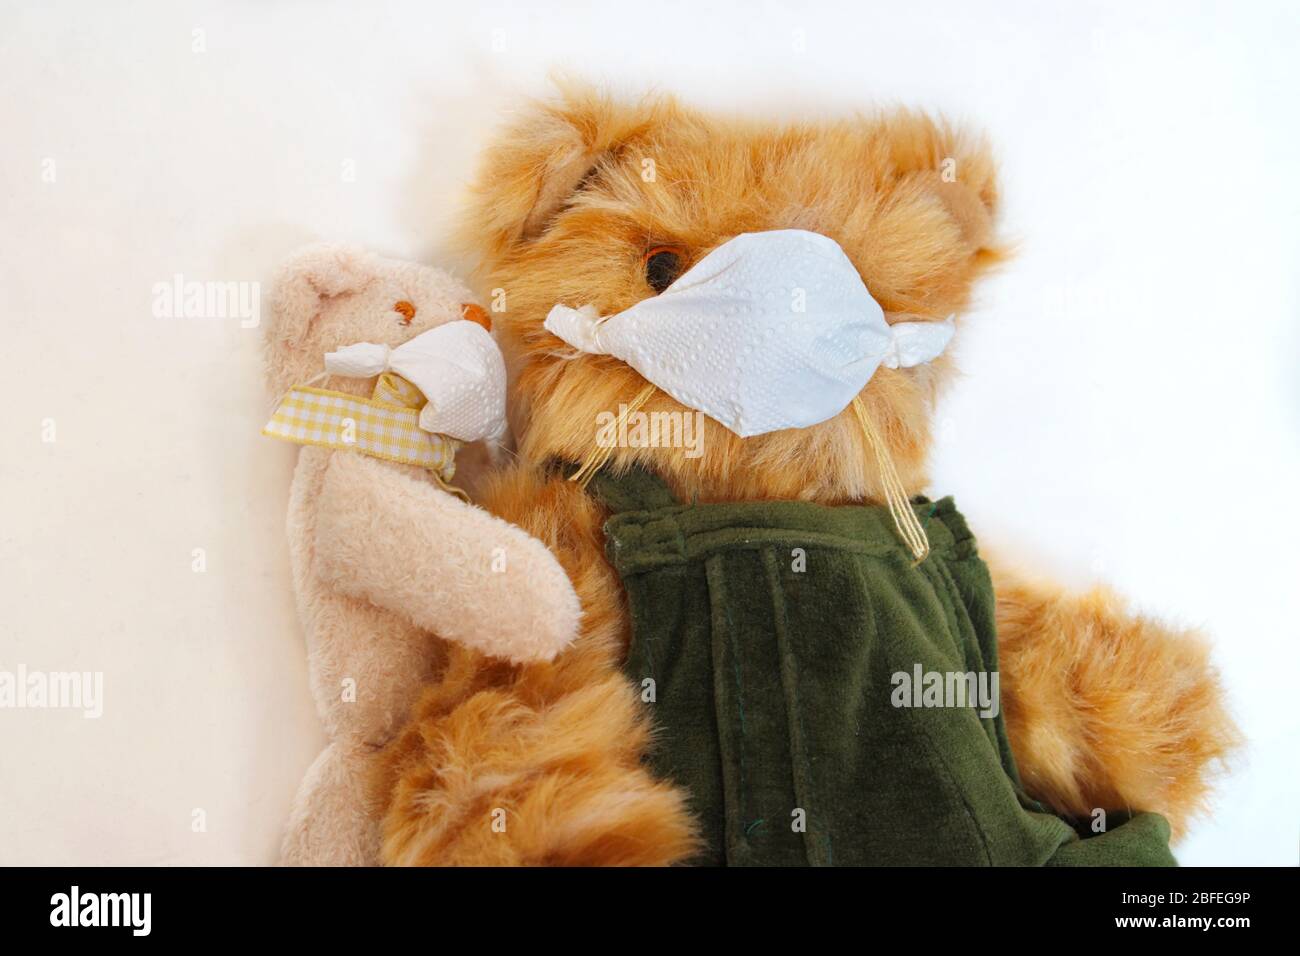 A furry teddy bear wearing a protective face mask is sitting on a chair. He's accompanied by a smaller teddy, also wearing a mask. Stock Photo